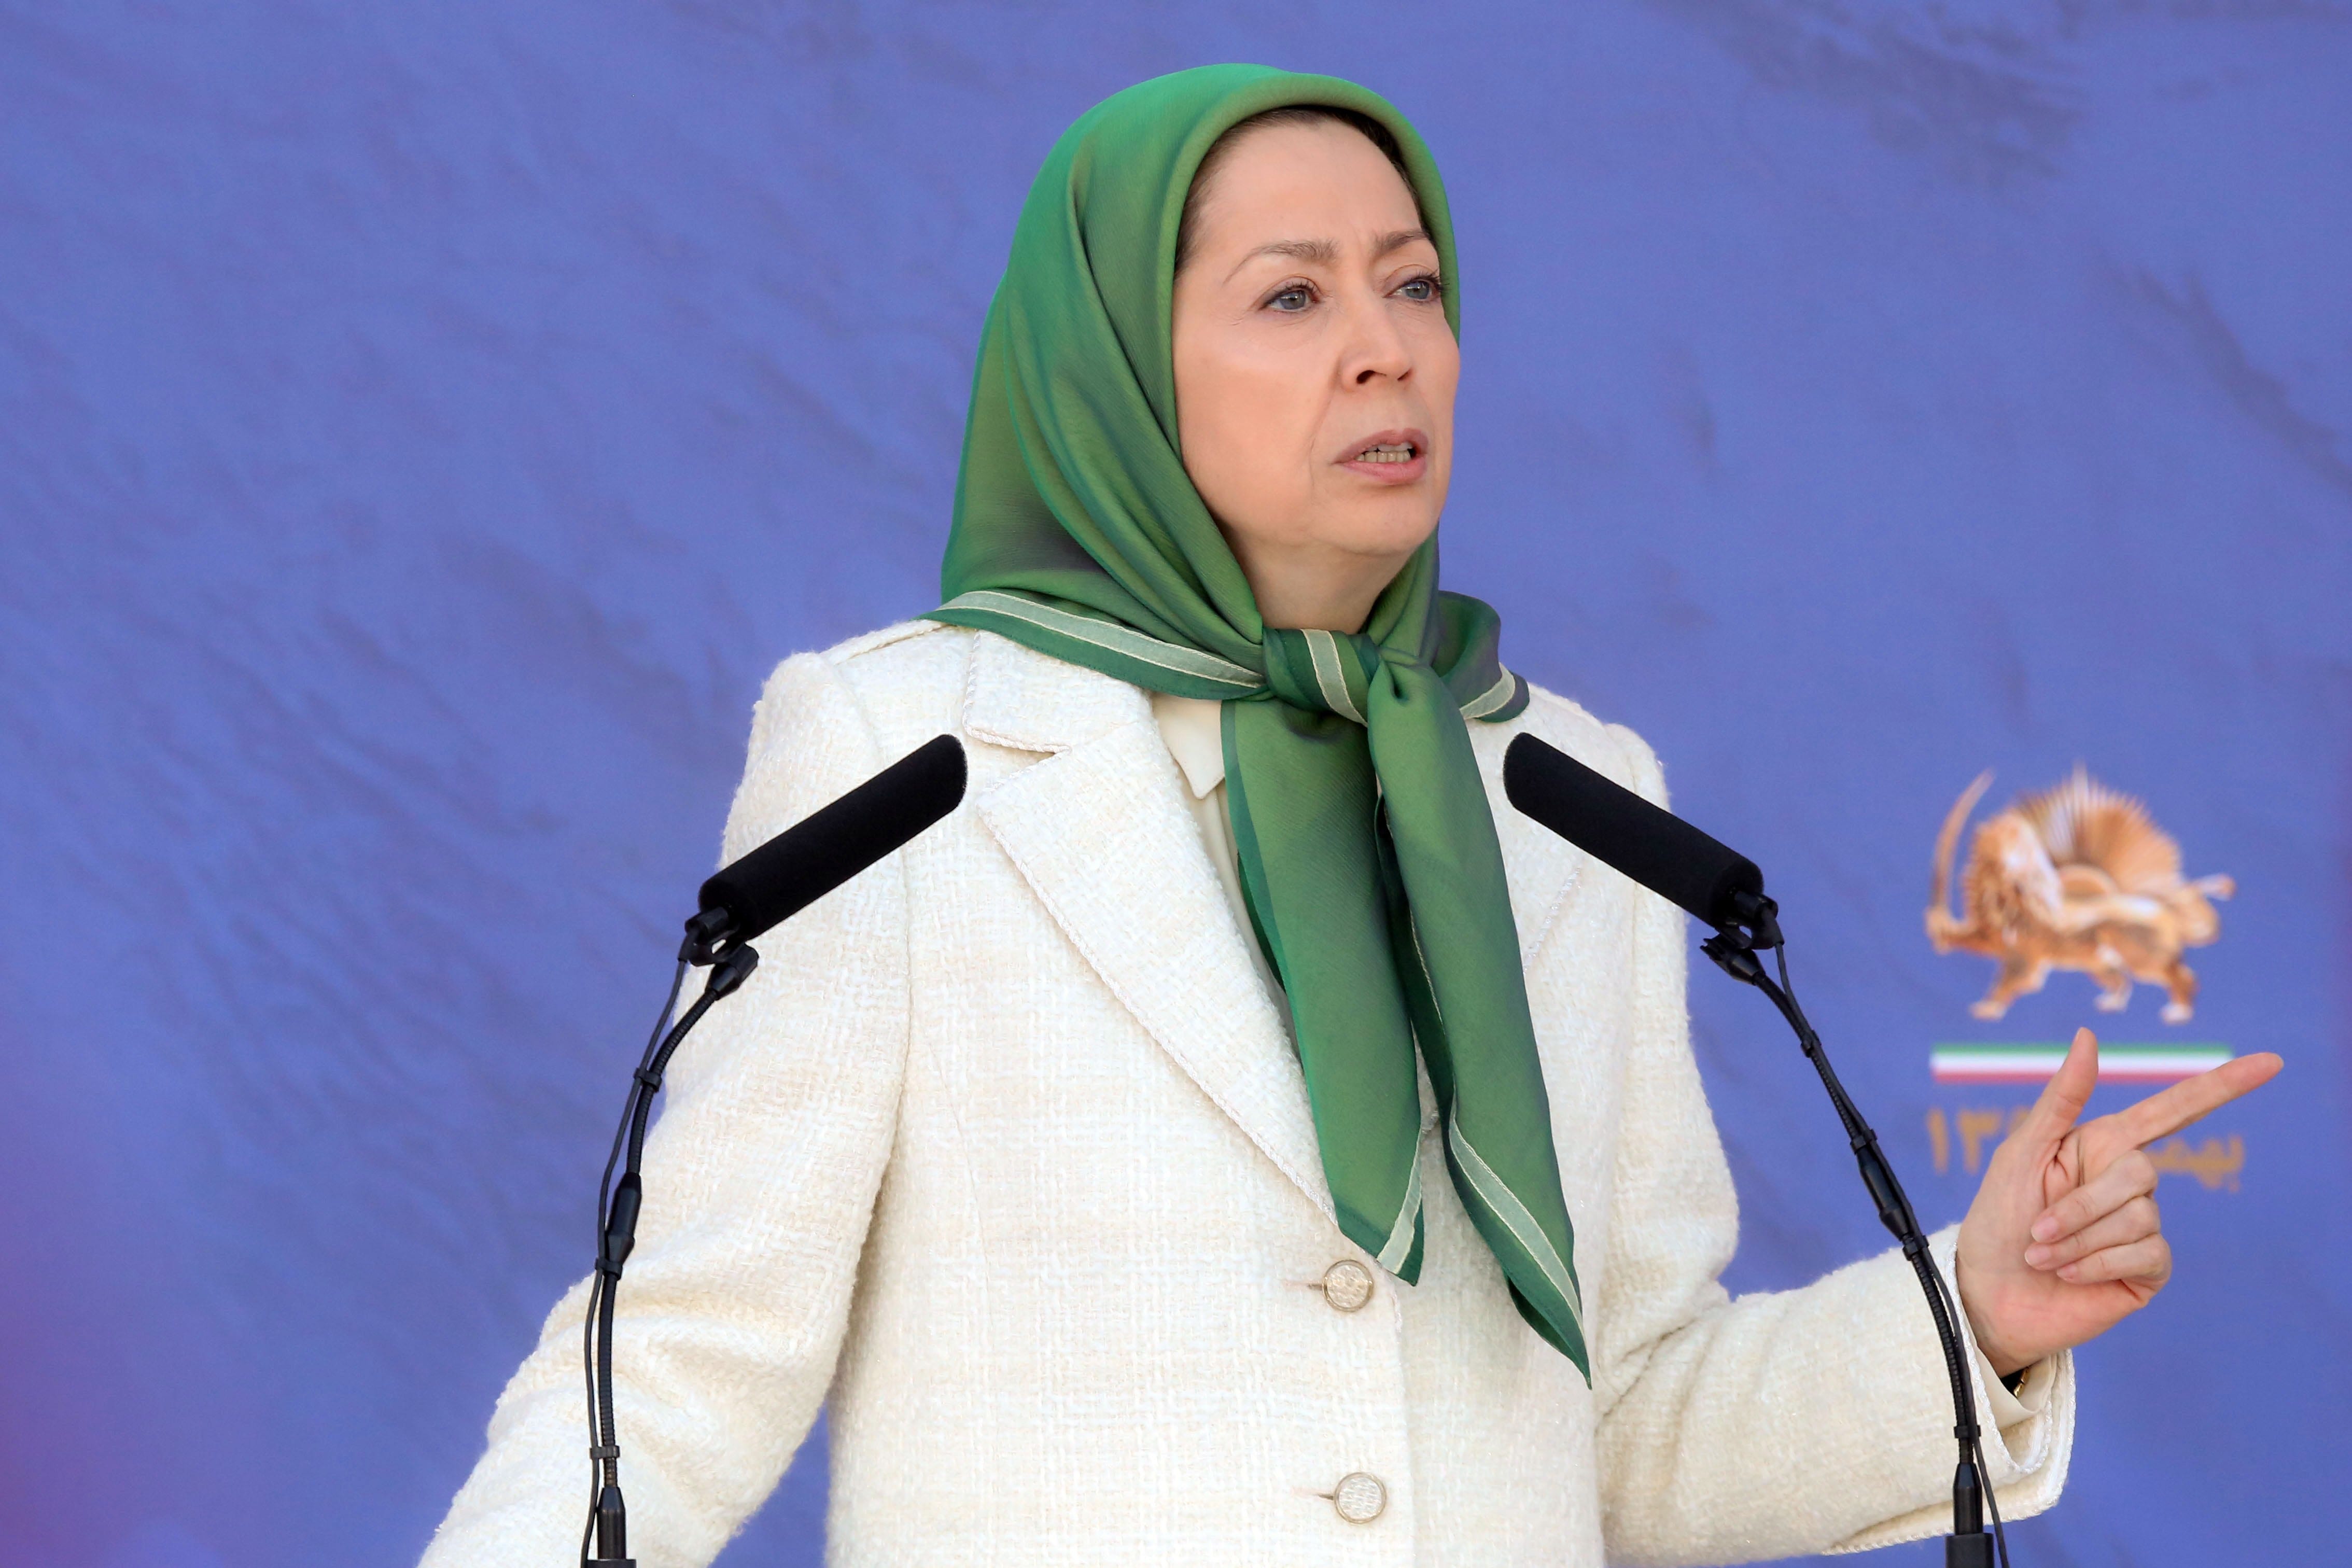 Iranian resistance leader says the regime is ‘at its weakest point’, urging Biden to hold it accountable